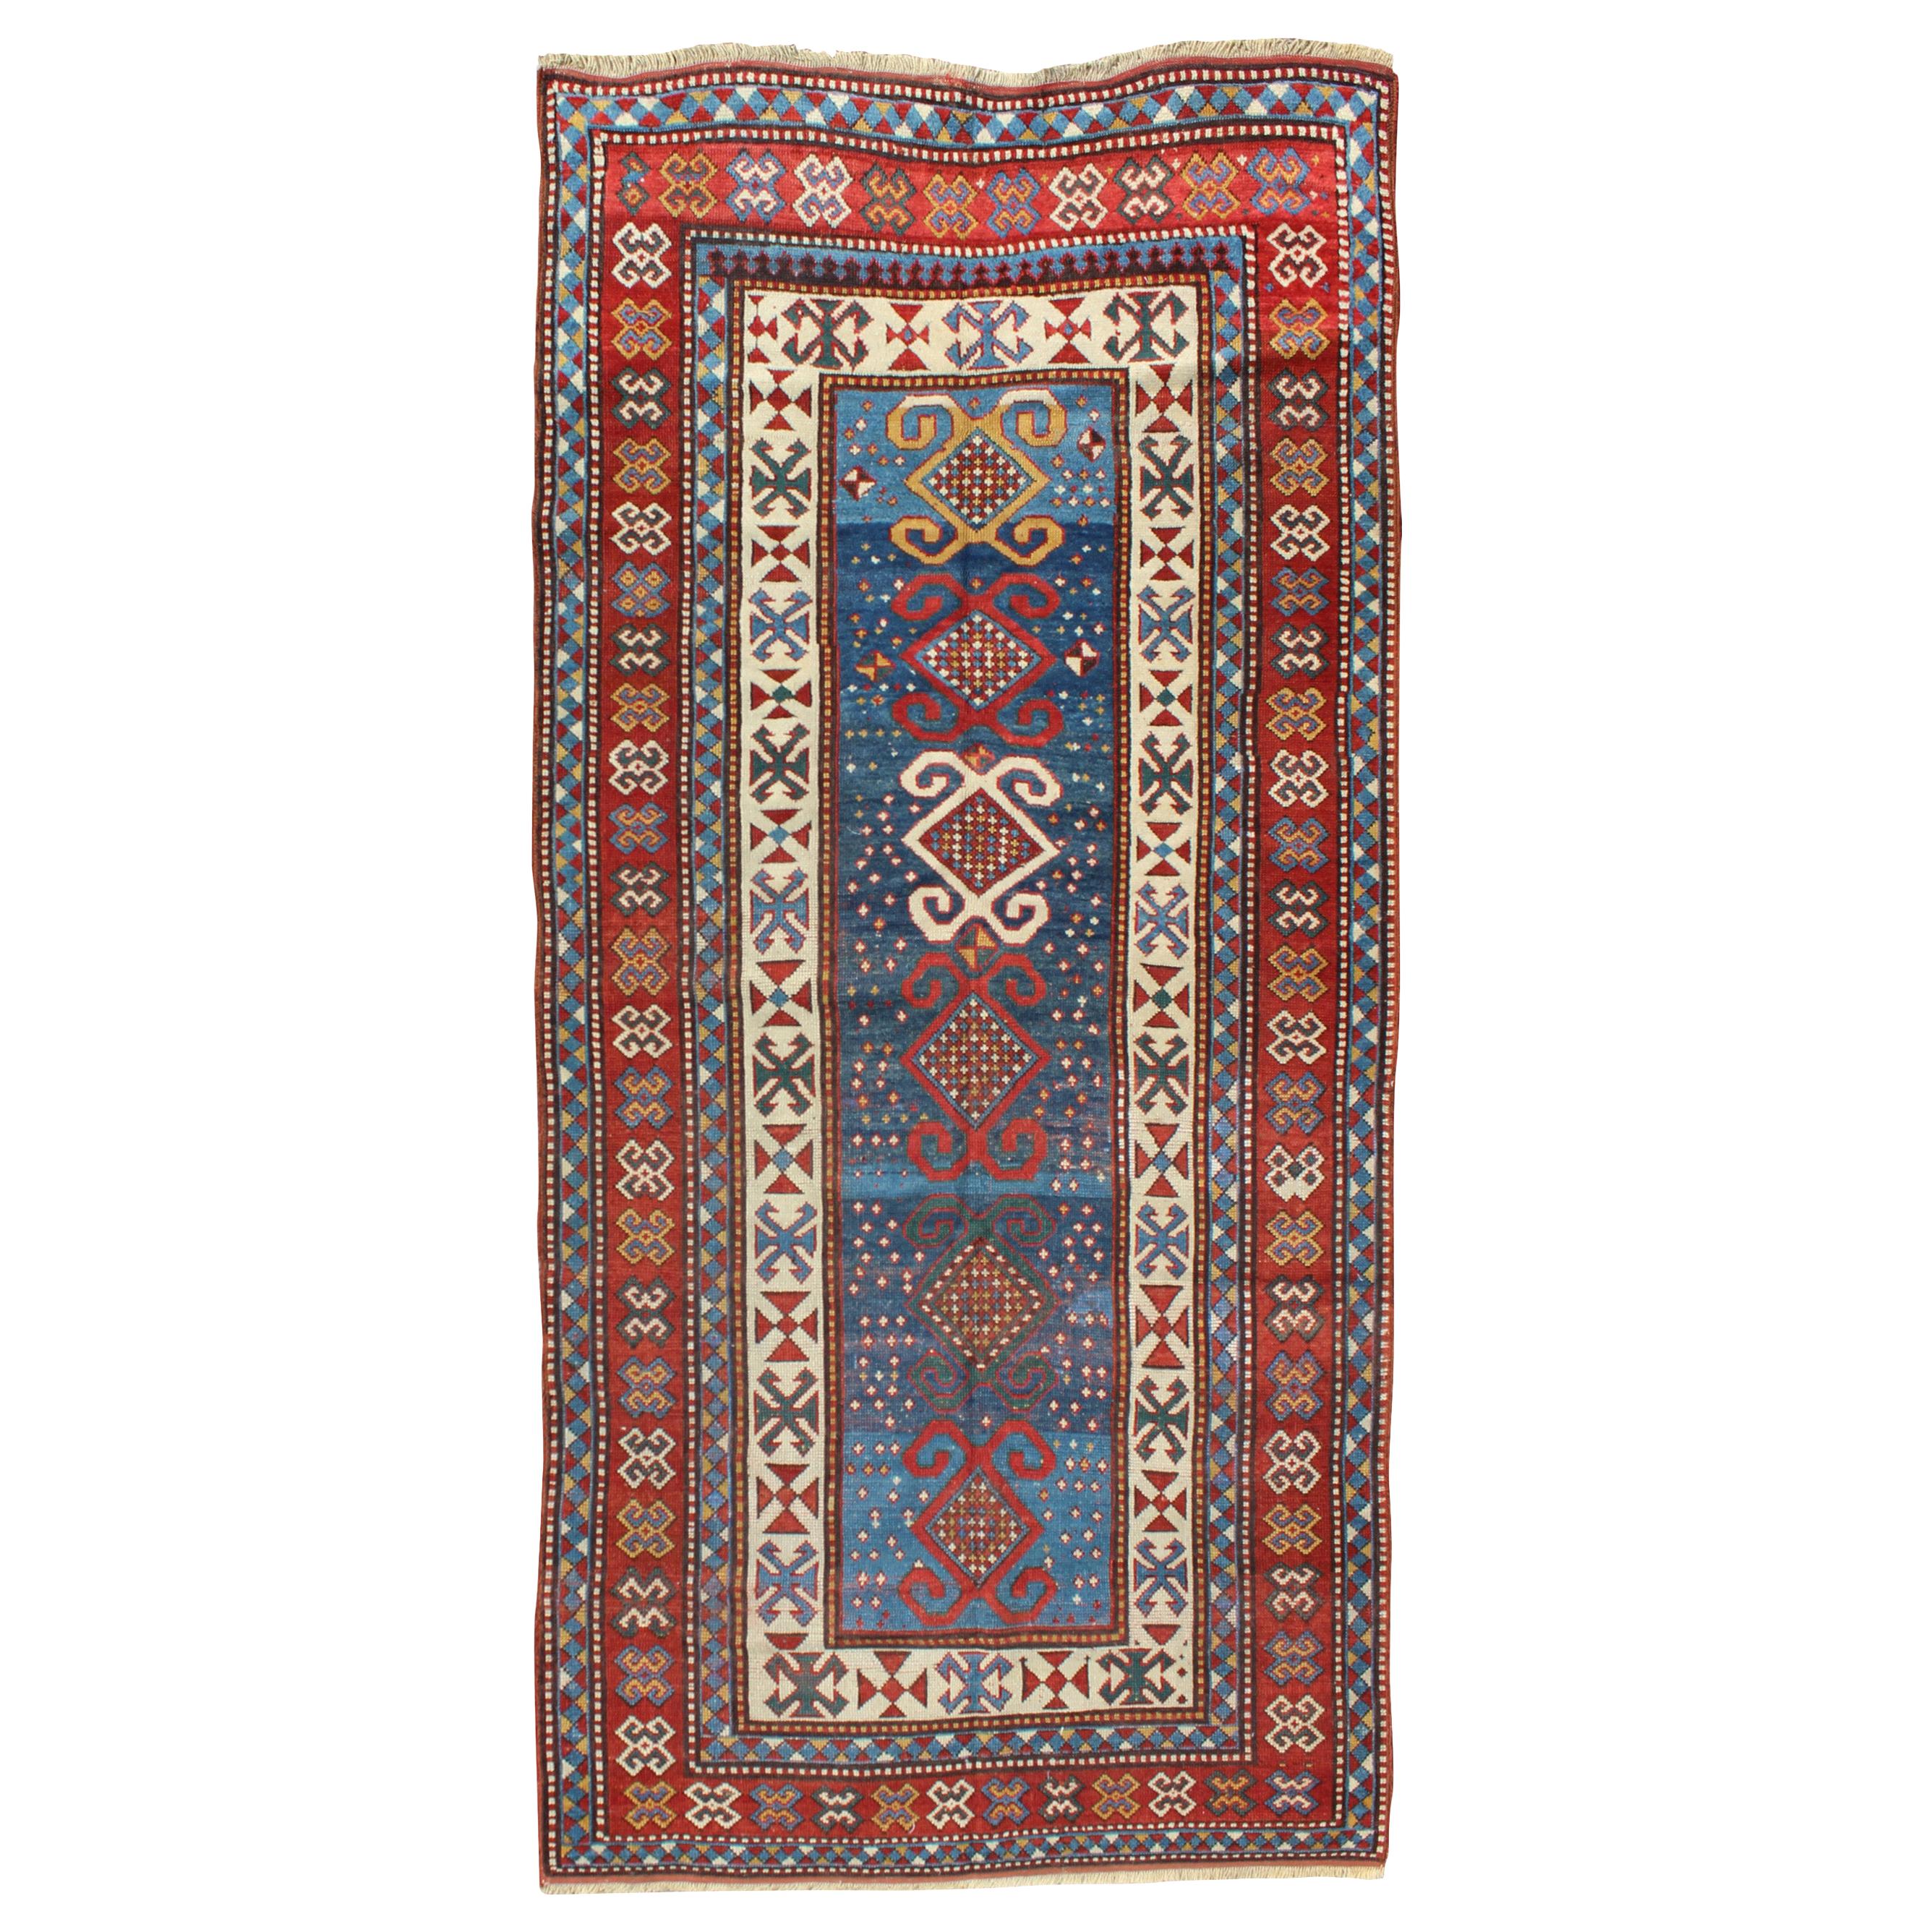 Red and Blue Antique Caucasian Kazak Rug with Vertical Tribal Medallions